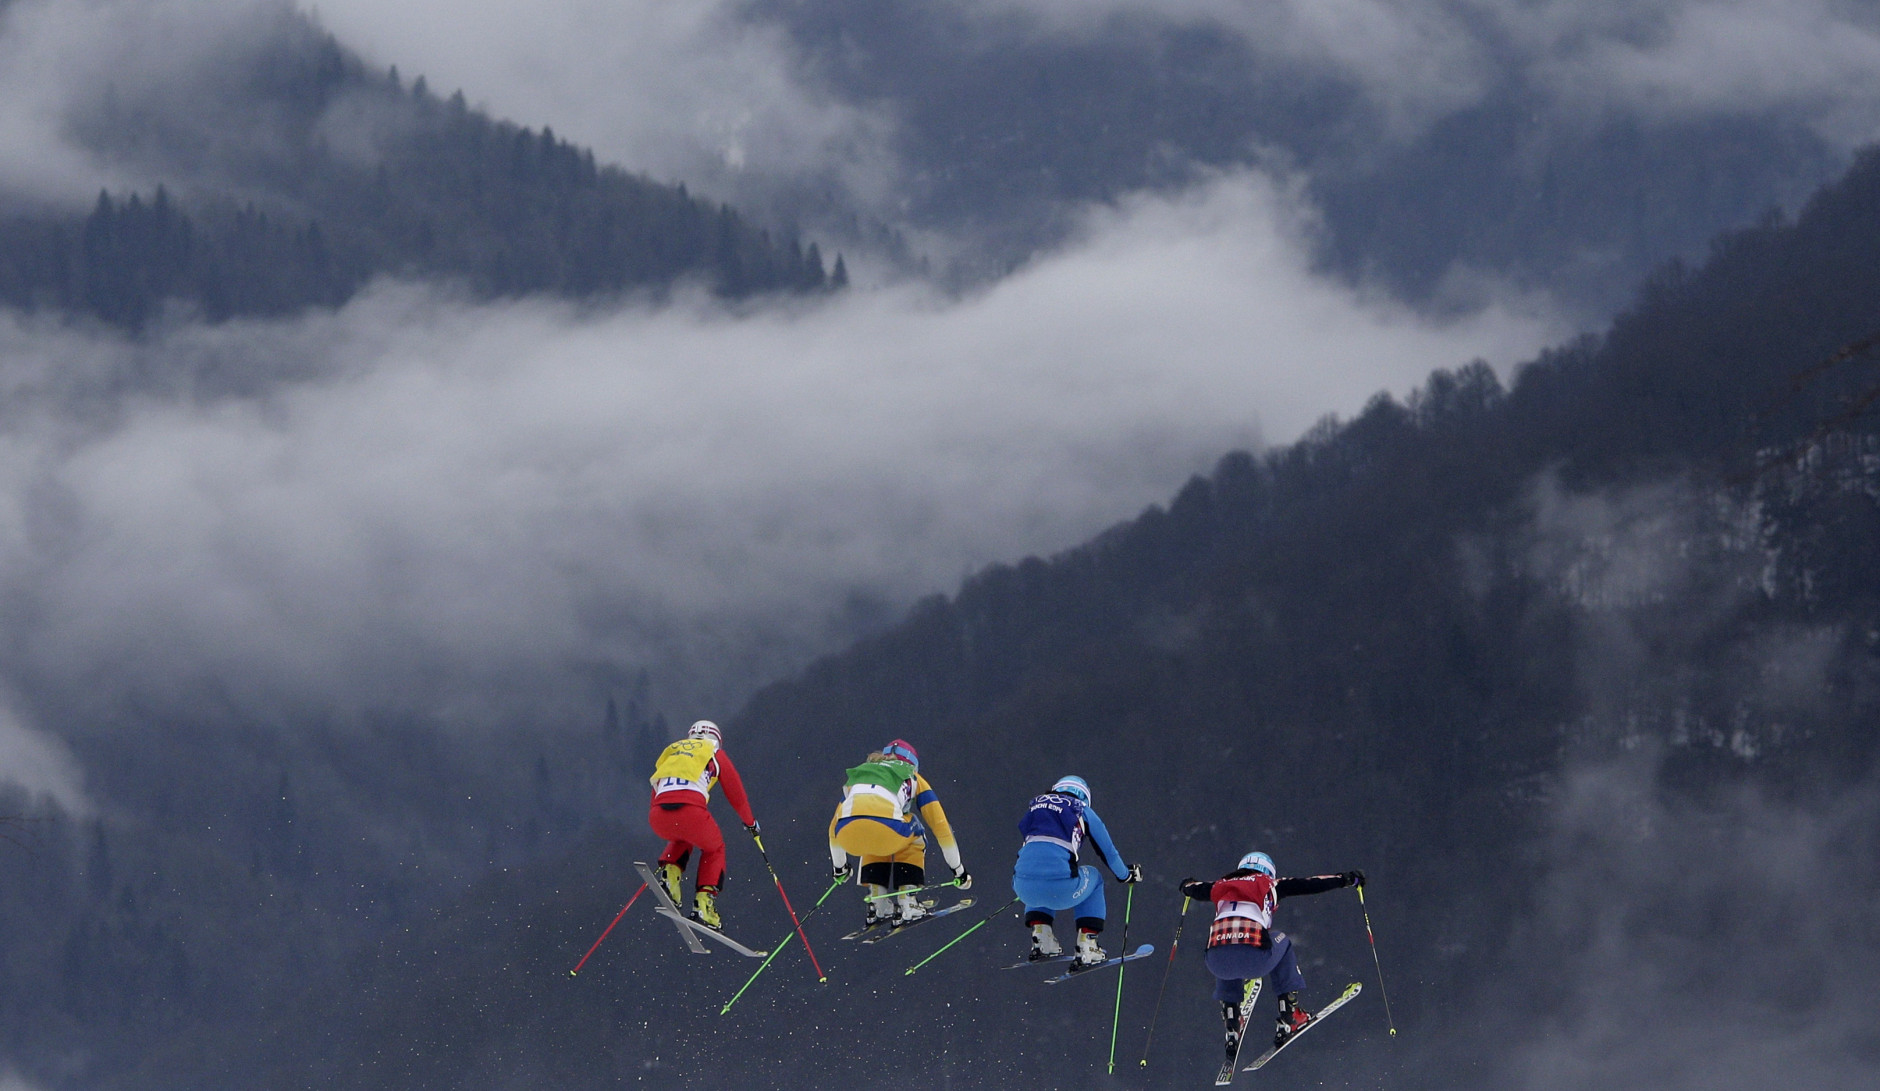 FOR USE AS DESIRED, YEAR END PHOTOS - FILE - Switzerland's Fanny Smith, from left, Sweden's Anna Holmlund, Austria's Katrin Ofner and Canada's Kelsey Serwa compete during their ski cross race at the 2014 Winter Olympics, Friday, Feb. 21, 2014, in Krasnaya Polyana, Russia. (AP Photo/Matthias Schrader, File)